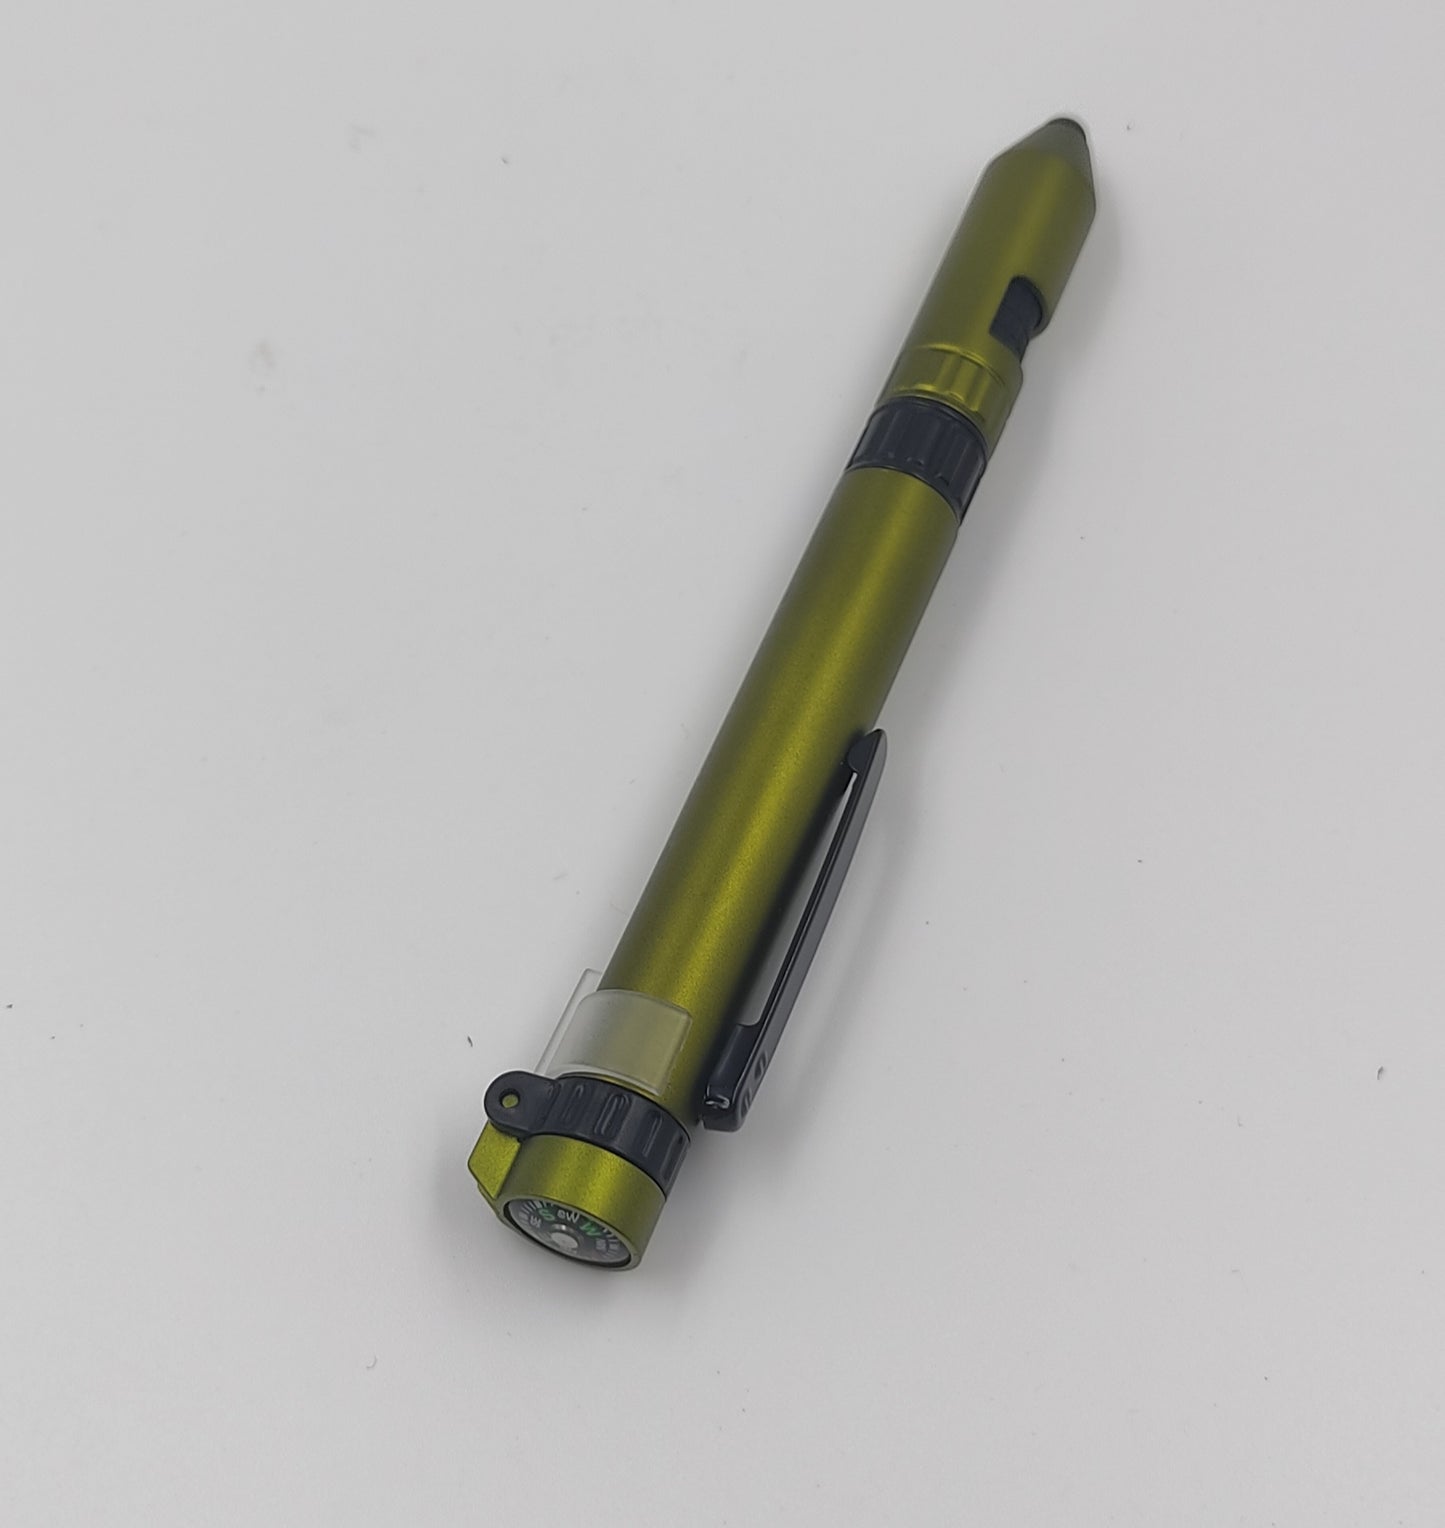 6 in 1 Military pen with compass, torch, tools, phone stand and stylus